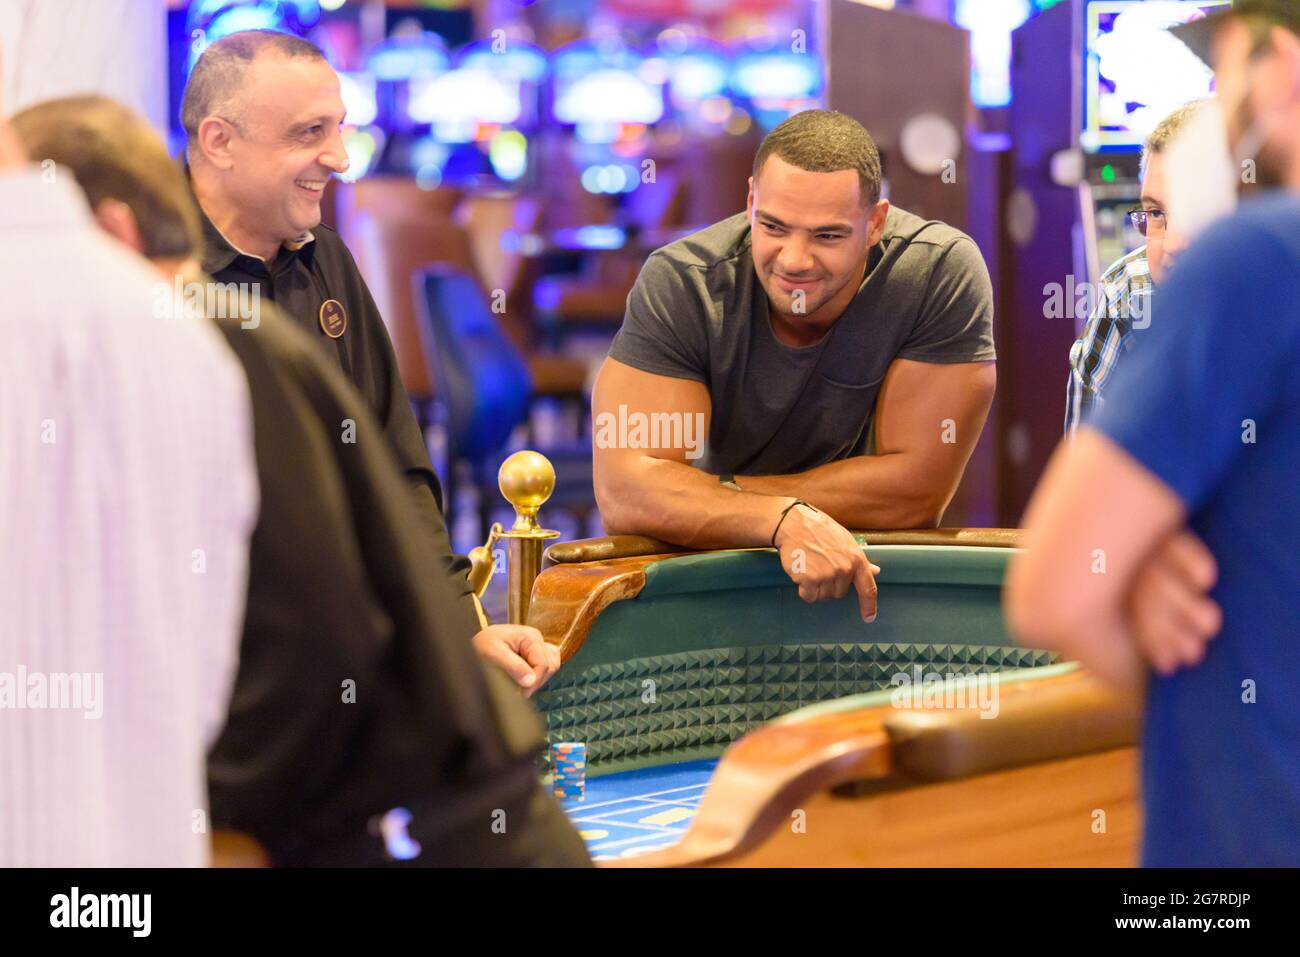 Las Vegas, NV, USA. 15th July, 2021. Clay Harbor pictured at Westgate Las Vegas Resort & Casino in Las Vegas, NV on July 15, 2021. Credit: Gdp Photos/Media Punch/Alamy Live News Stock Photo